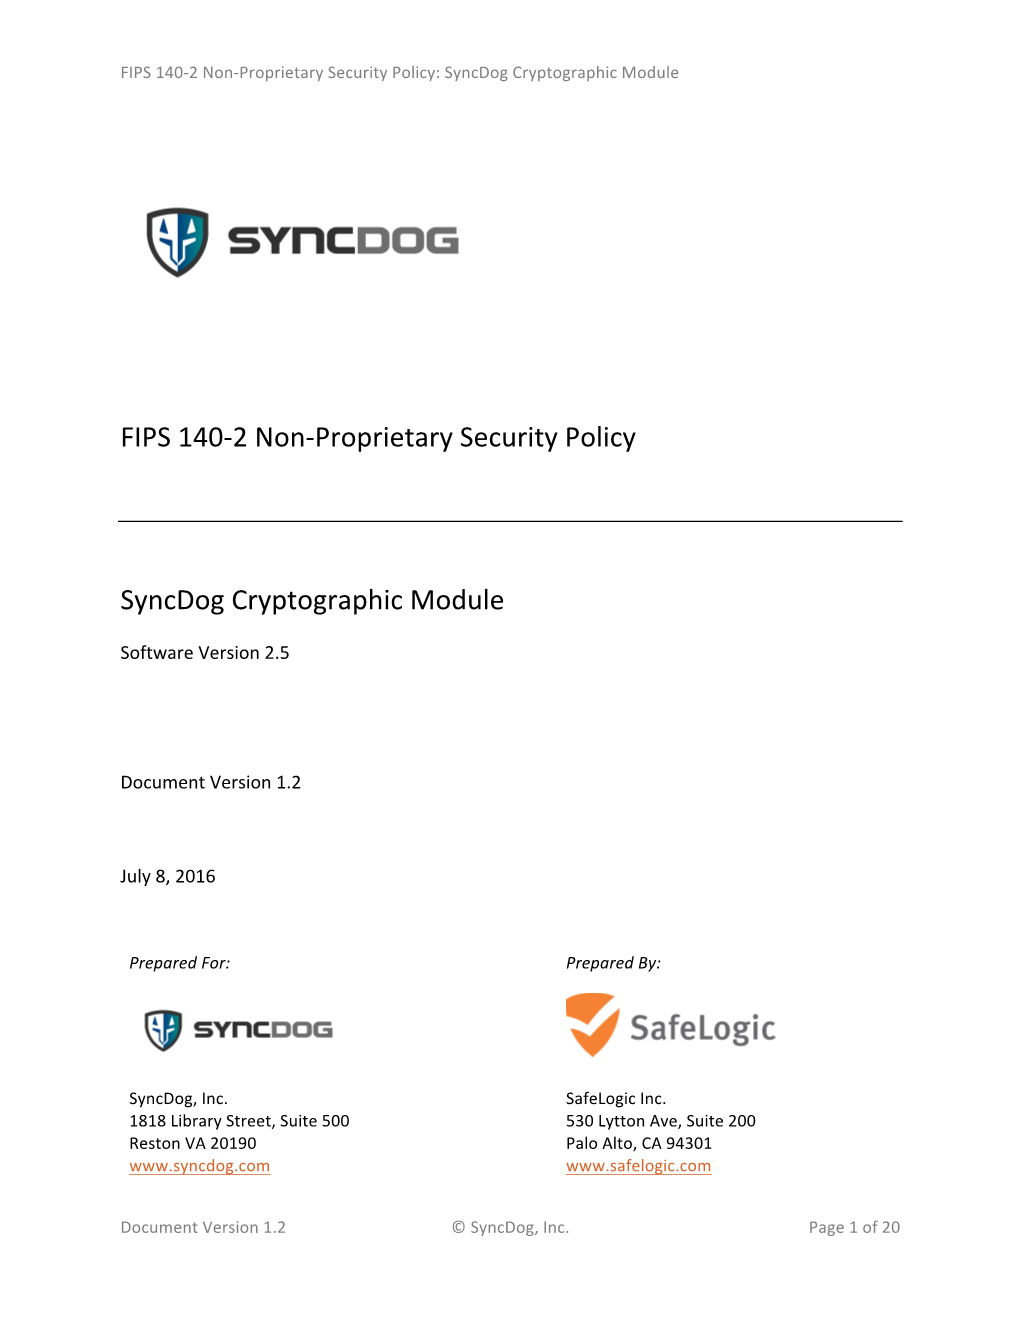 Syncdog Cryptographic Module FIPS 140 Security Policy V1-2